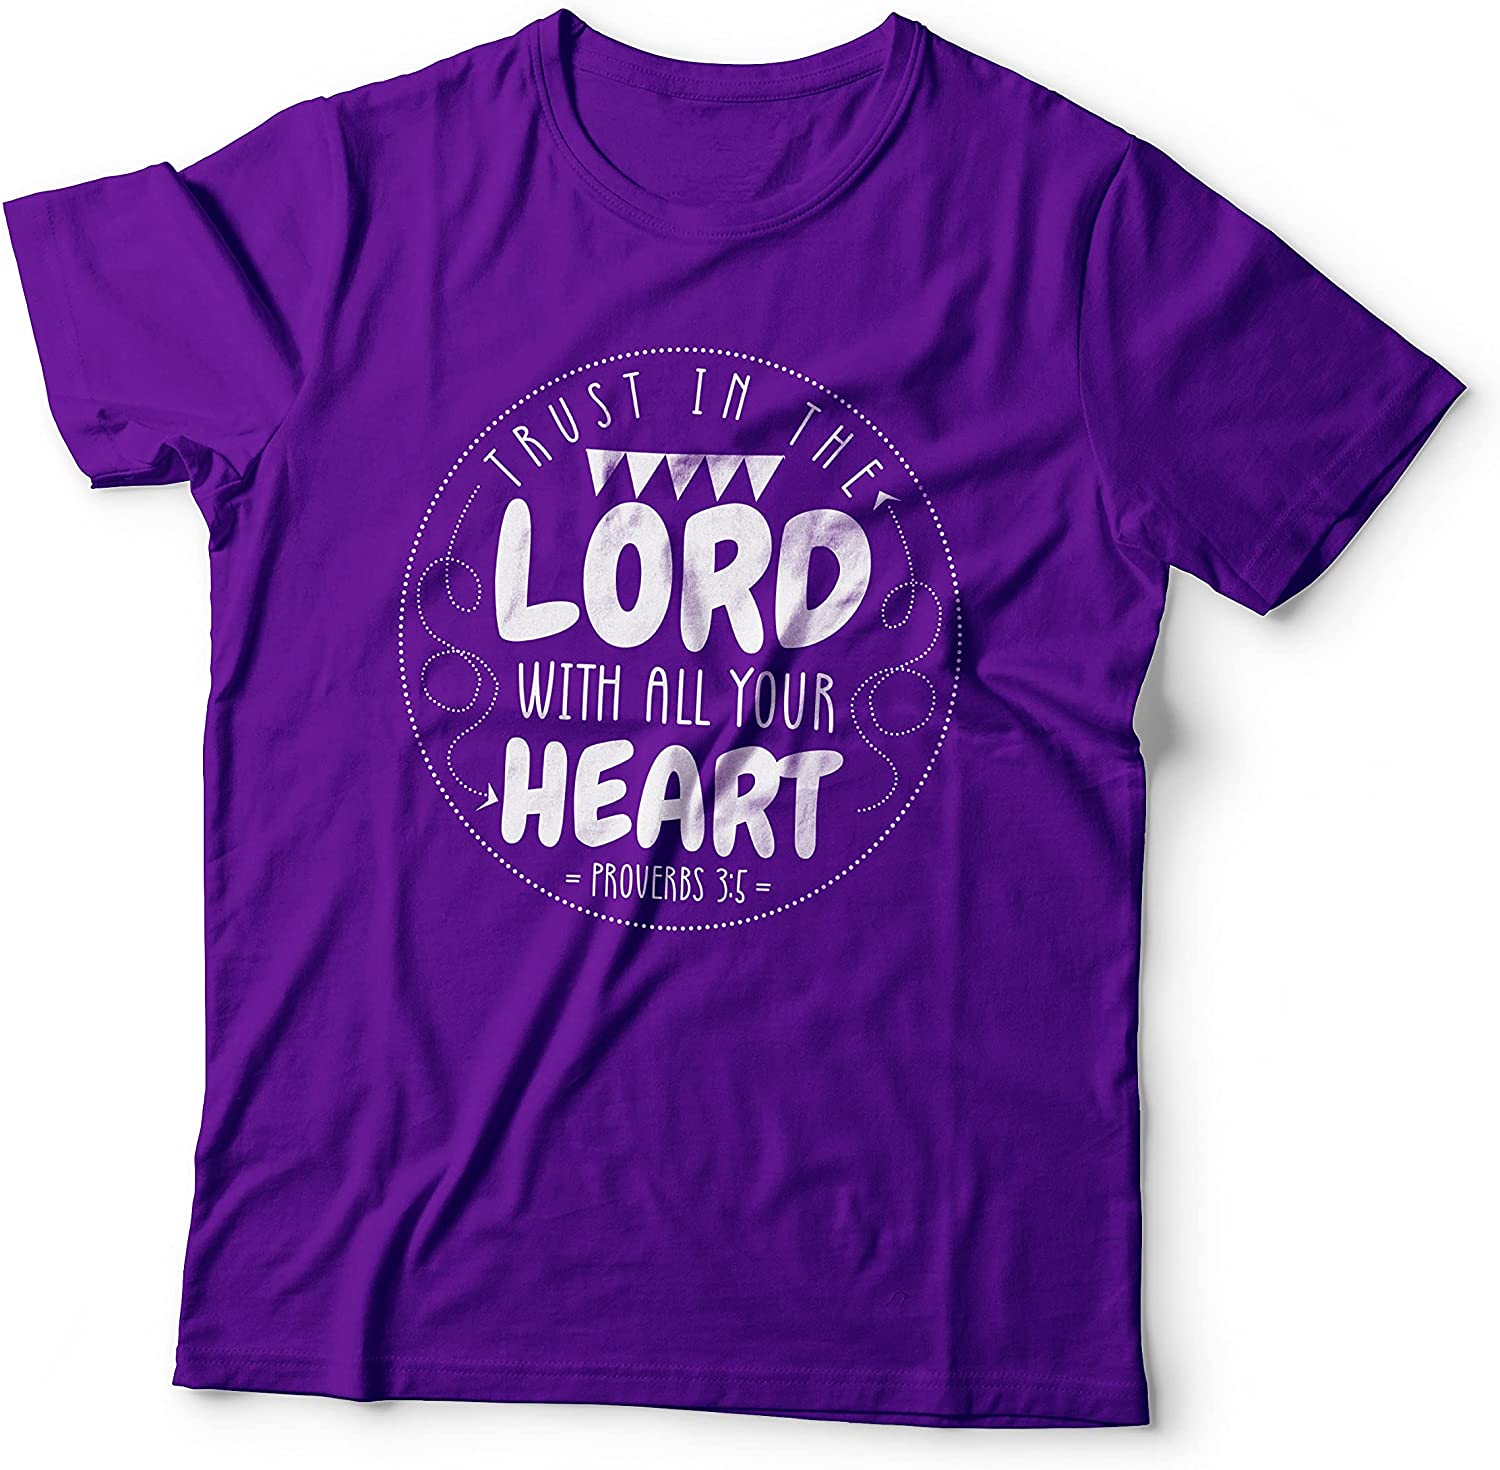 Trust In The Lord With All Your Heart Proverbs 3-5 Religious Christian T-shirt Purple-4XLarge